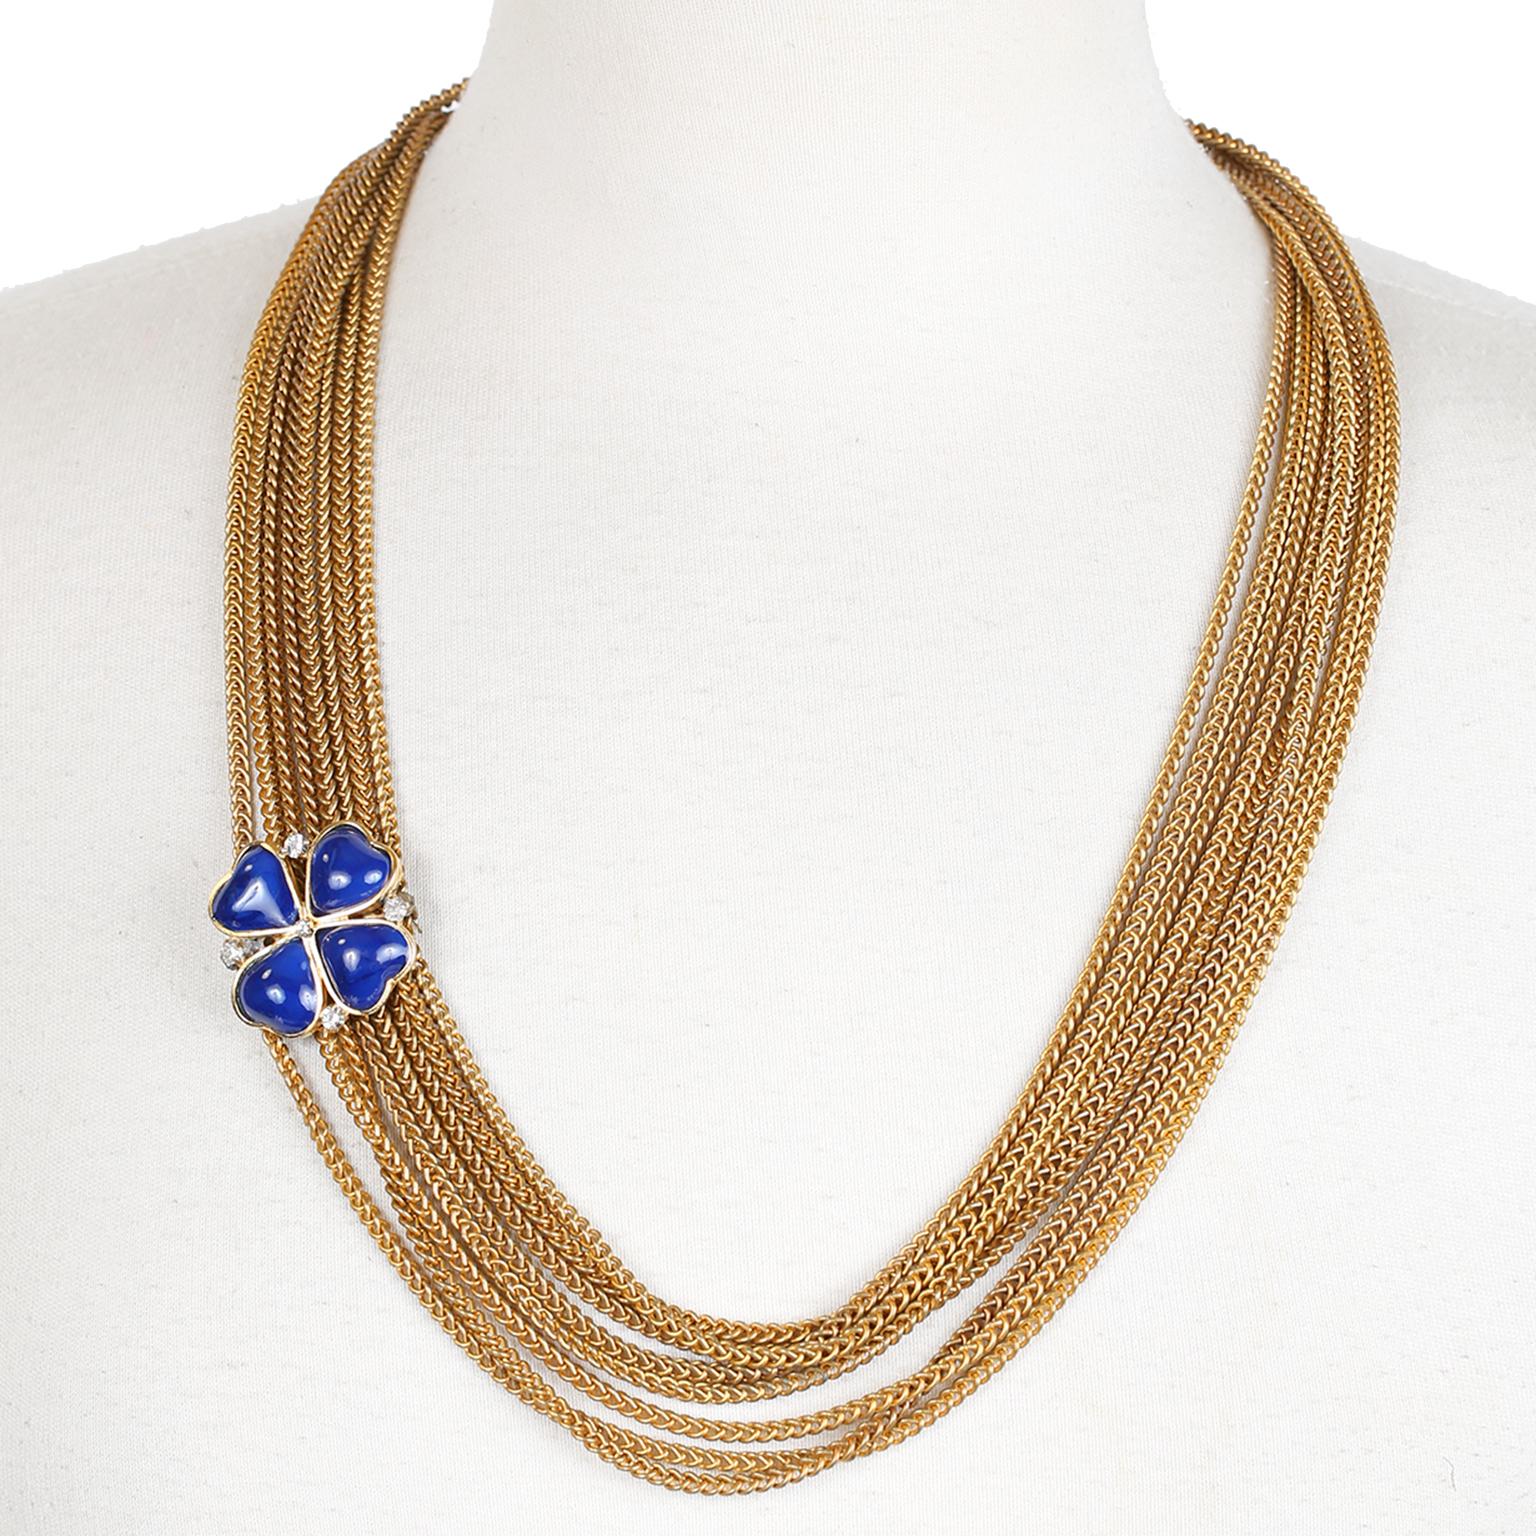 Chanel Blue Clover Gold Multi Chain Vintage Necklace In Good Condition For Sale In Palm Beach, FL